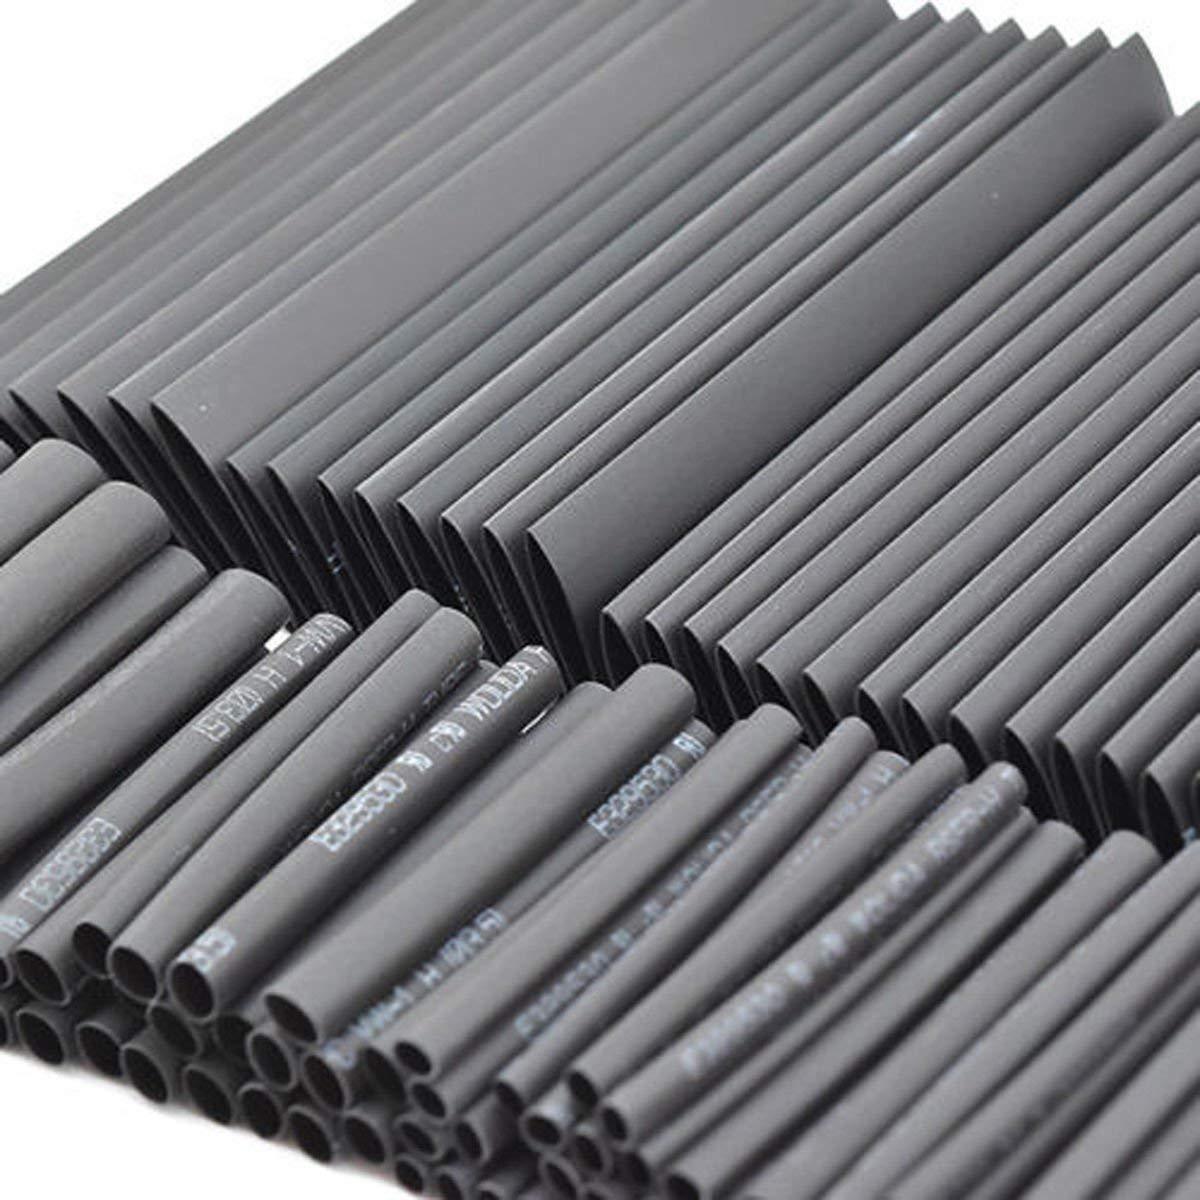 127-Piece Heat Shrink Tubing Set for Electrical Wires - Assorted Wrap Cable Kit TIKA Does Not Apply